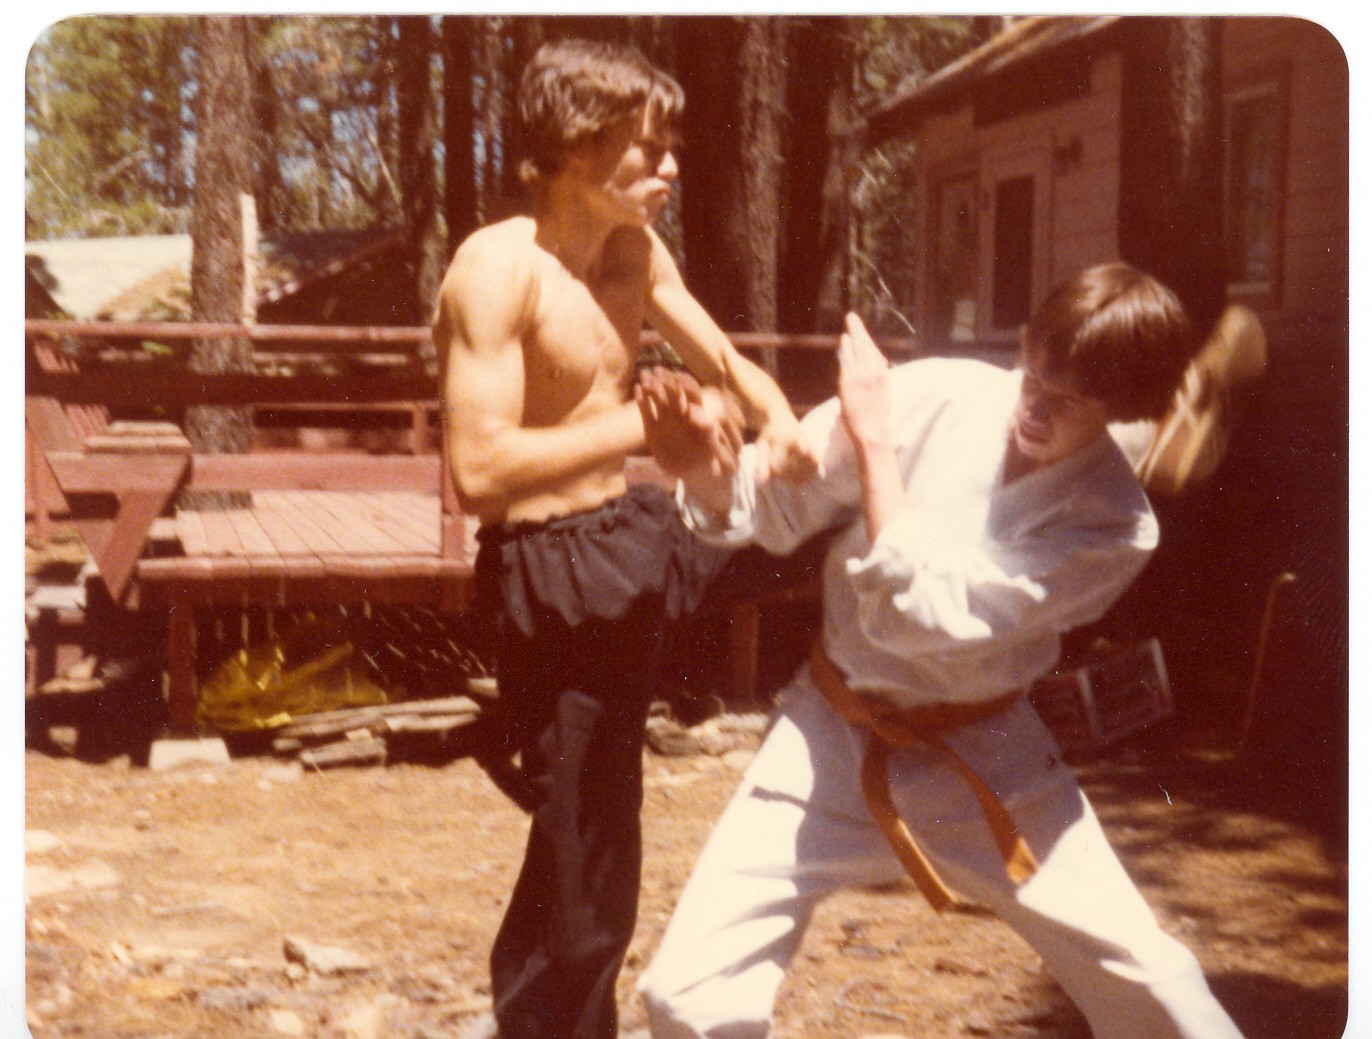 Jim started studying the martial arts at 14 years later, and he has not stopped over 40+ years later. Here he is (left) at 17 years old training with a friend.